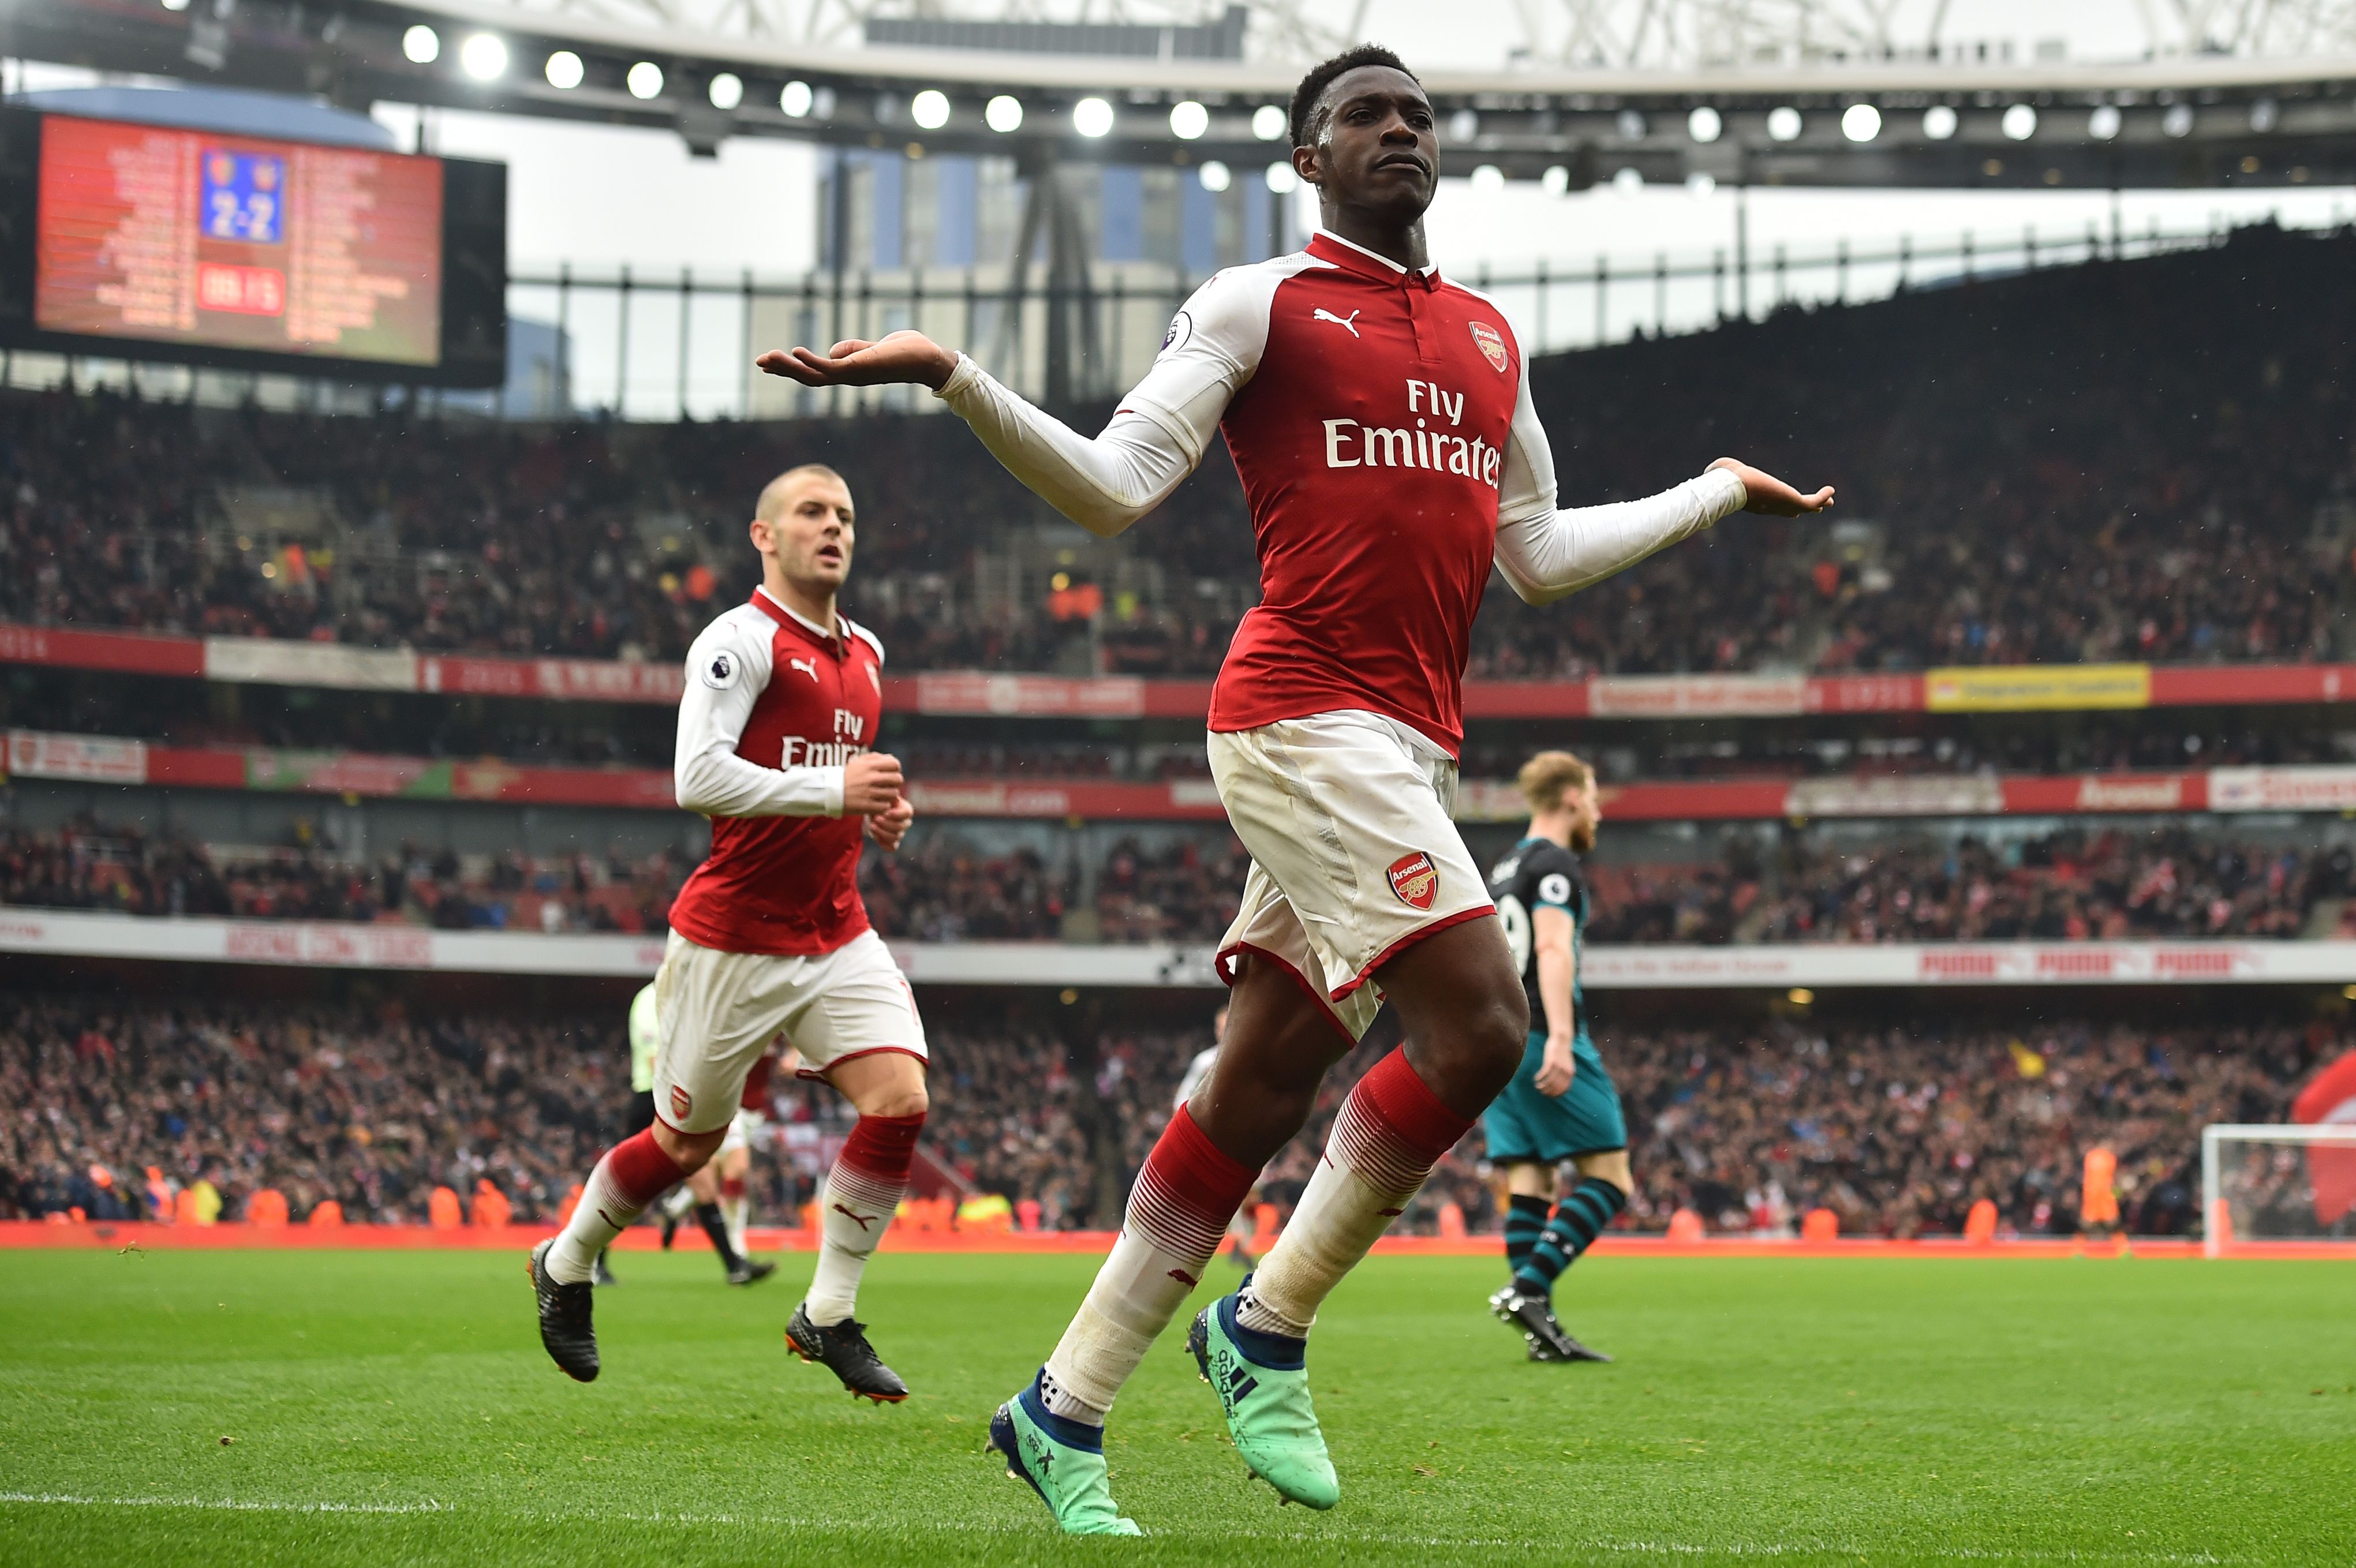 Welbeck was the hero for Arsenal (Photo: GLYN KIRK/AFP/Getty Images)